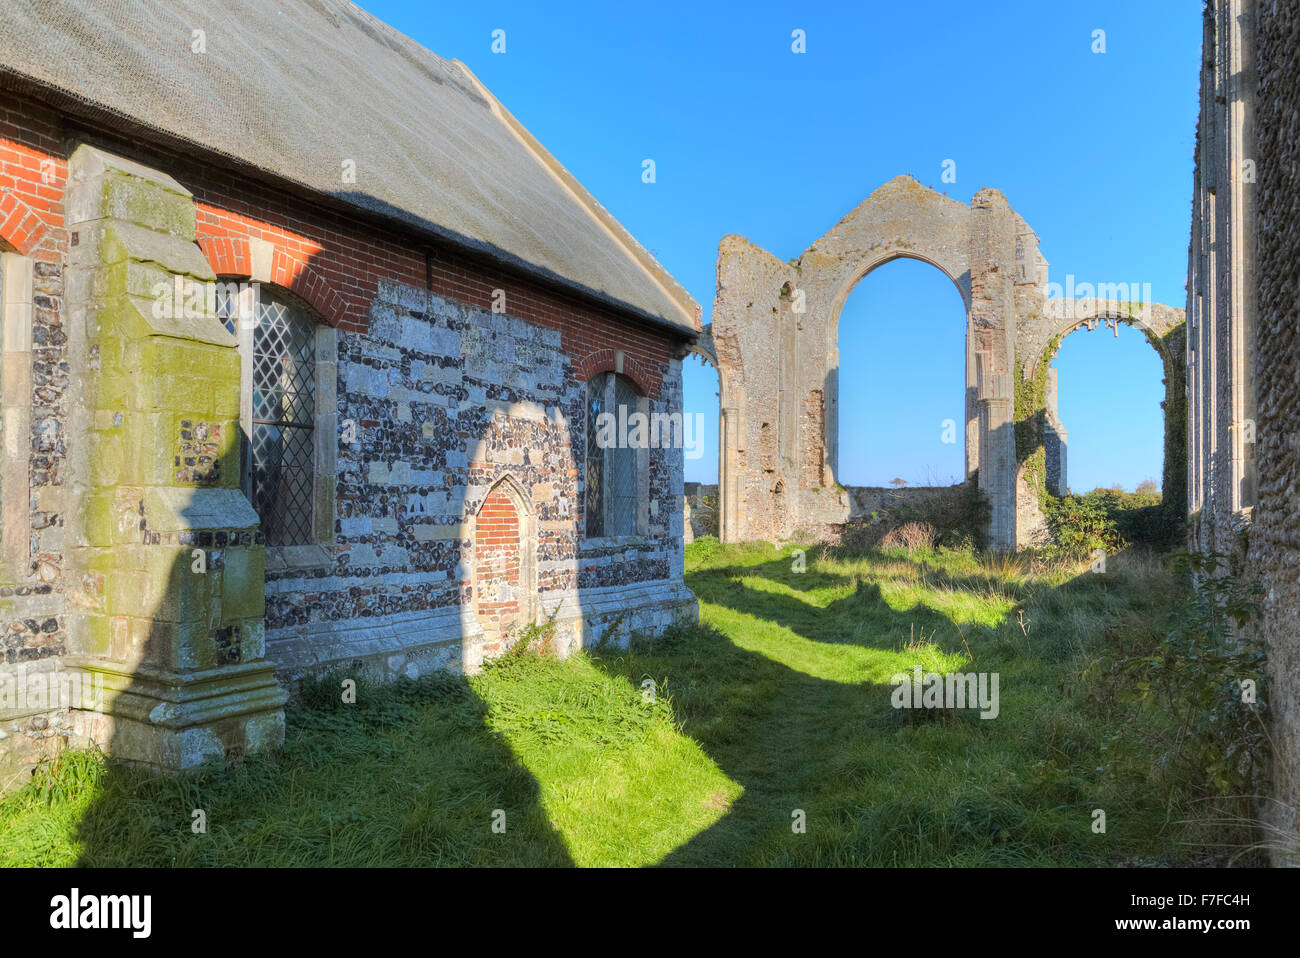 St Andrew's Church, Covehithe, Suffolk, England, UK Stock Photo